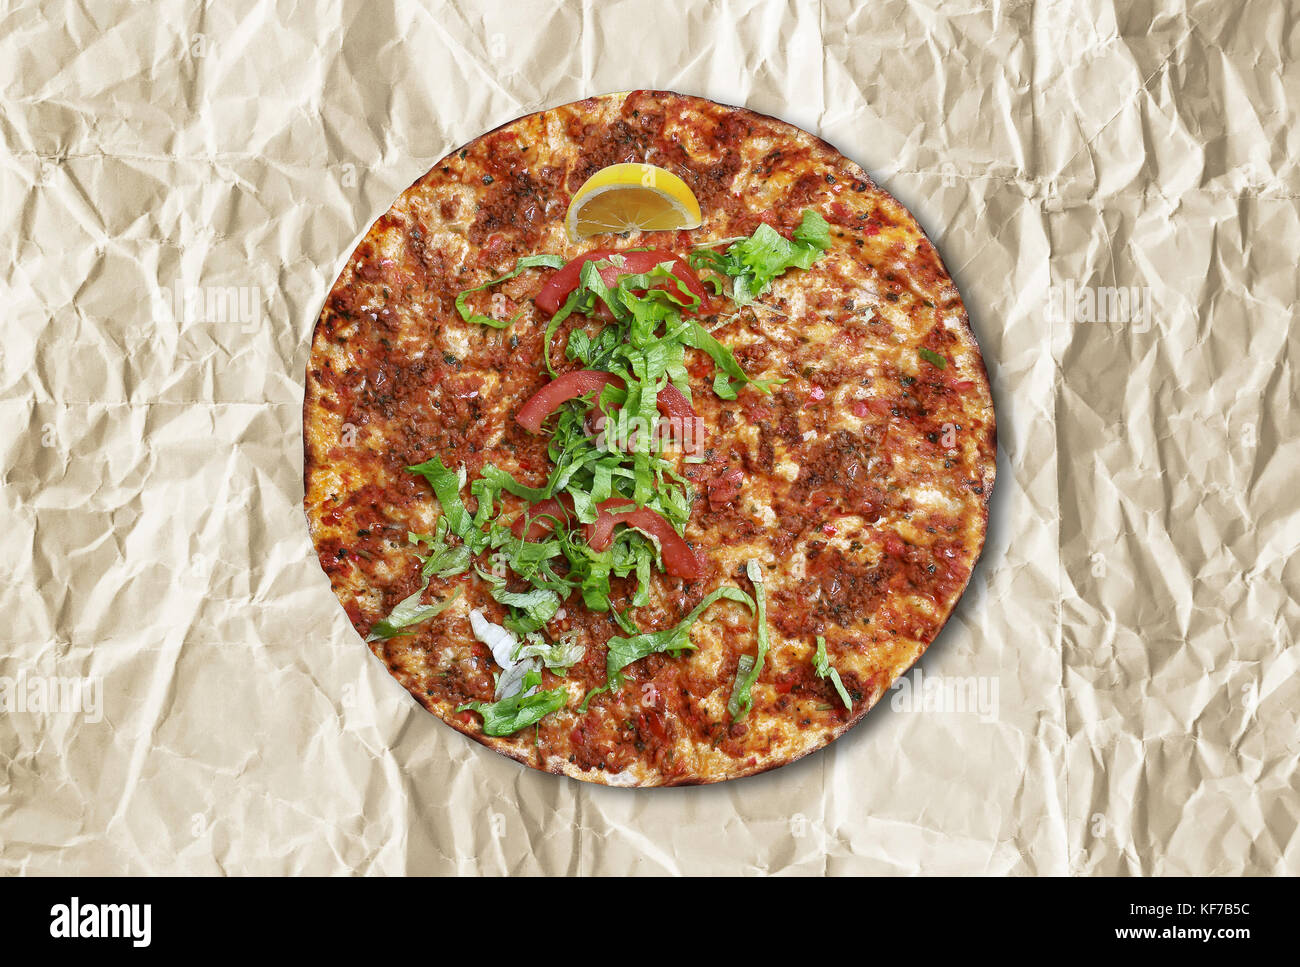 'Turkish lahmacun' on a wrinkled paper. Stock Photo